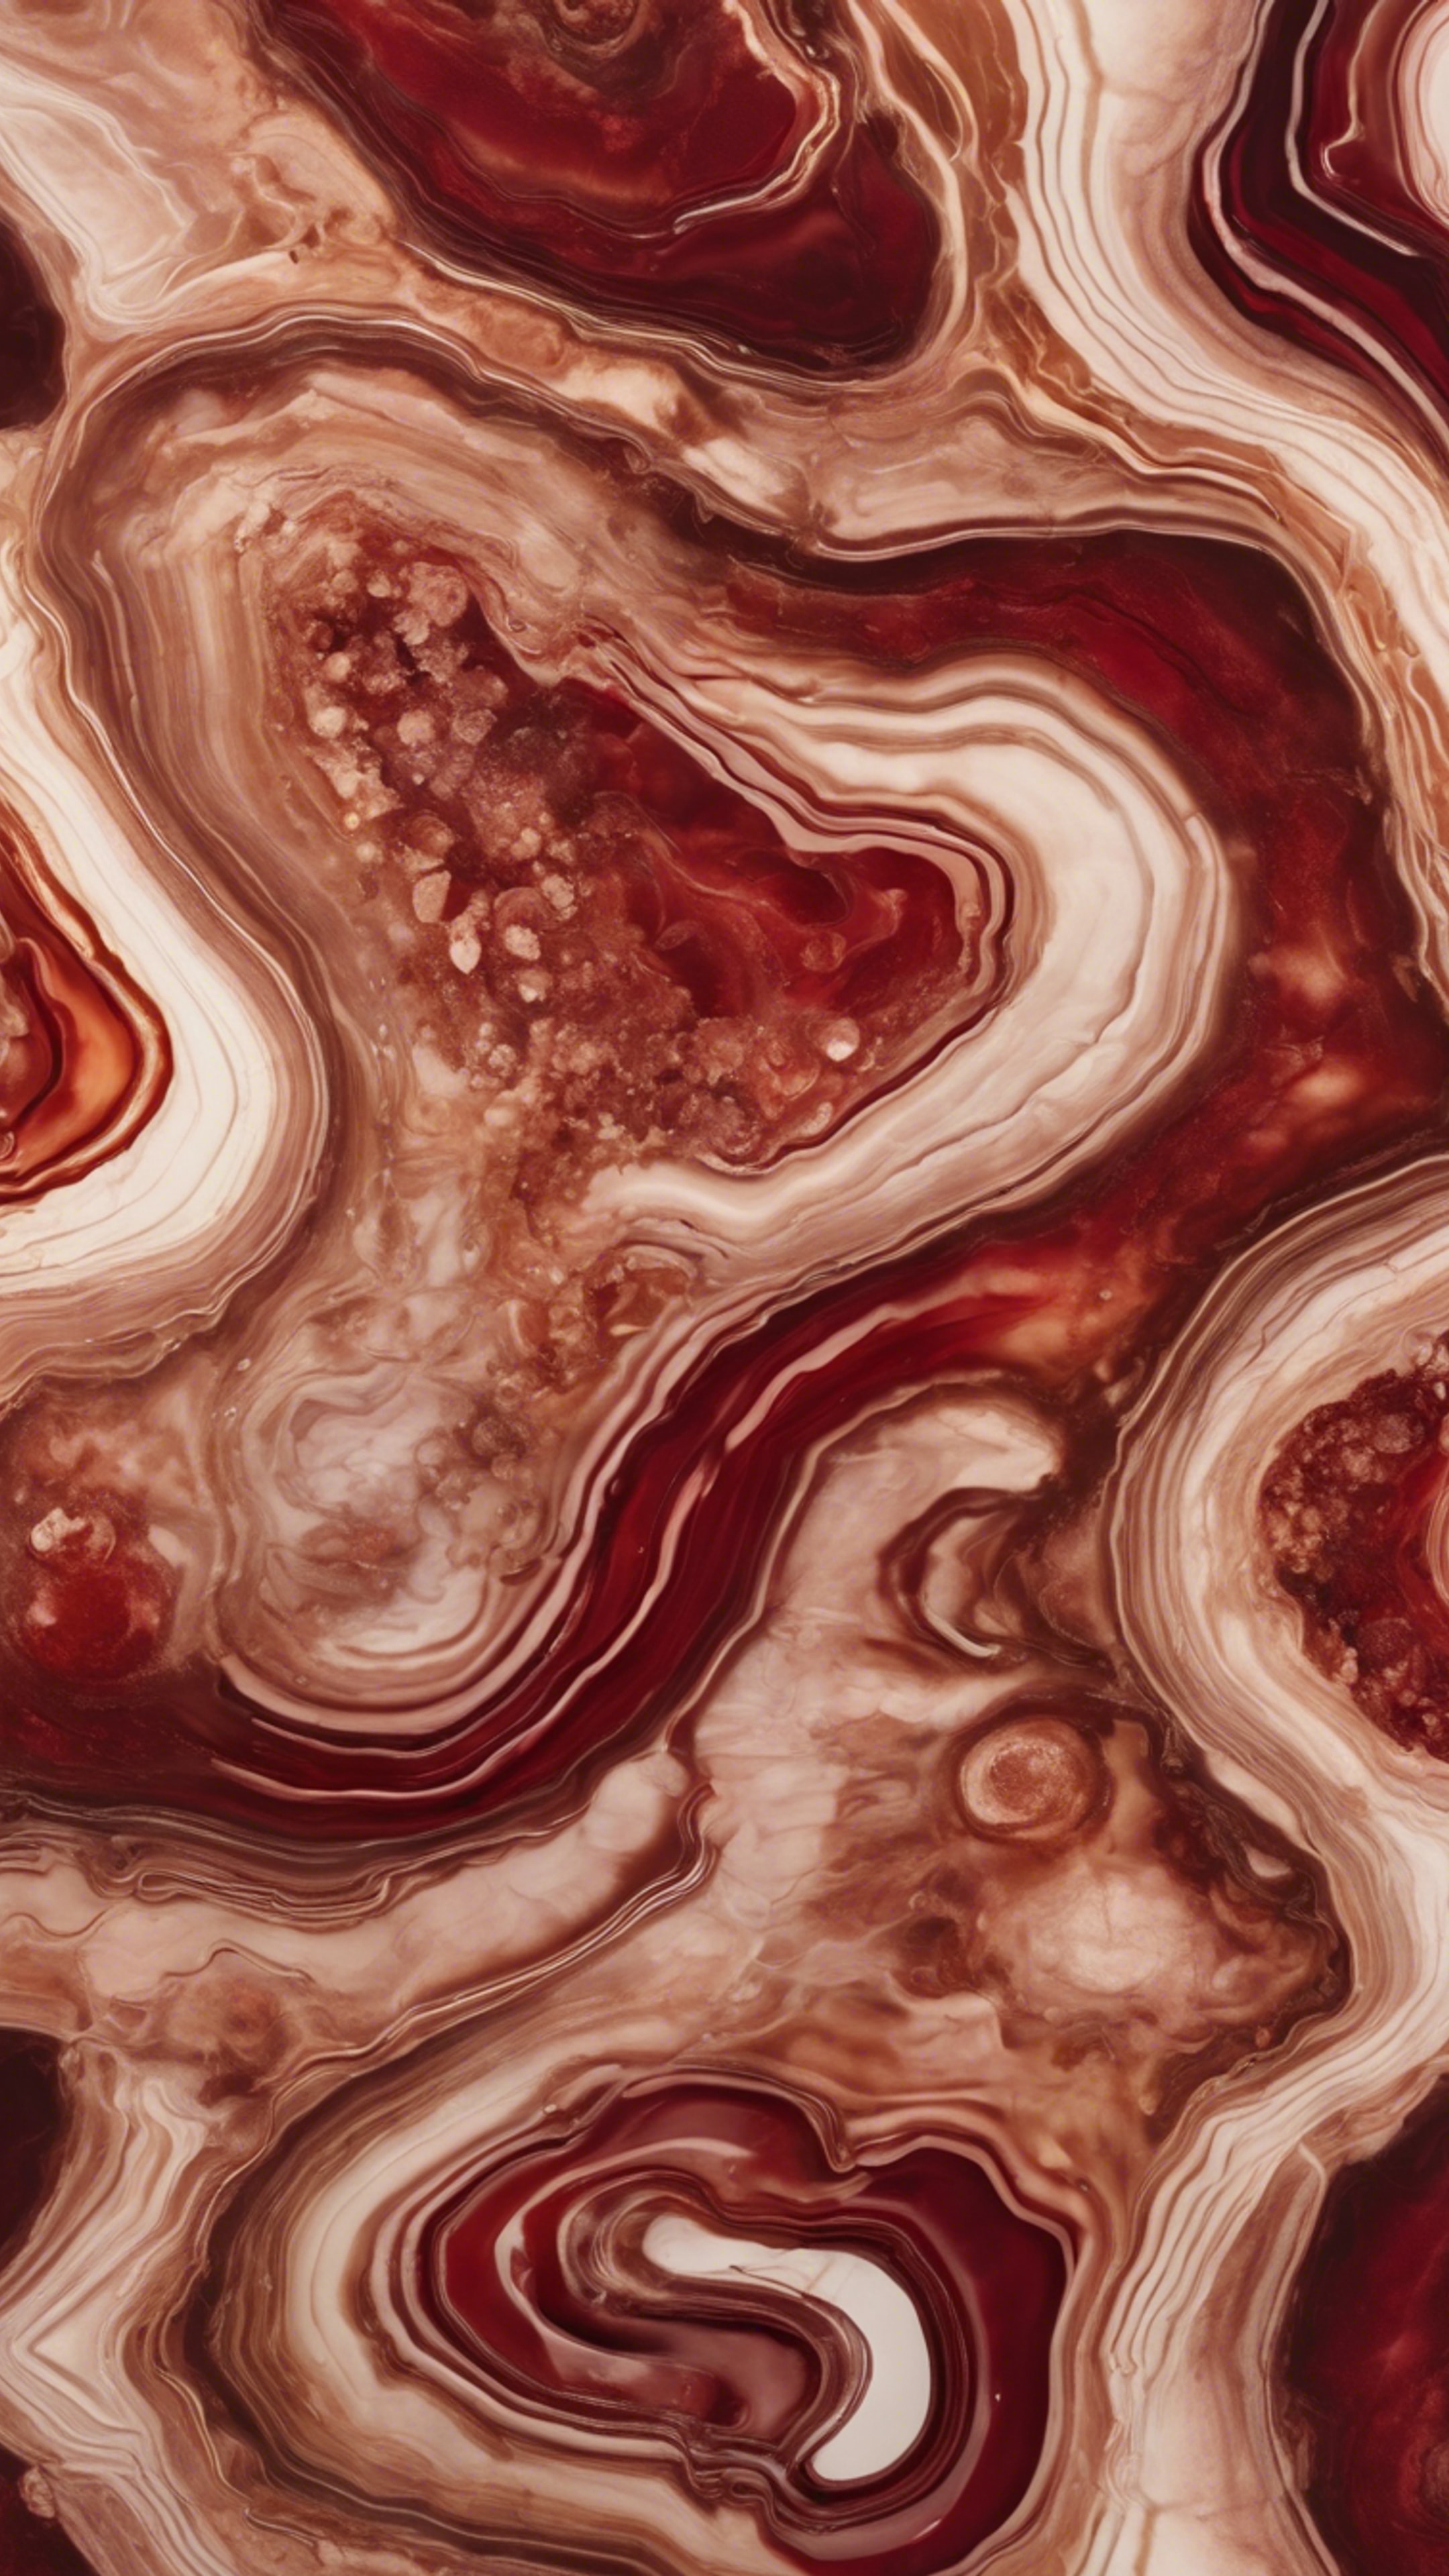 Grungy agate swirls in garnet red and sepia tones, forming a fascinating, abstract pattern. Papel de parede[bb48f1c473e4473bbd4a]